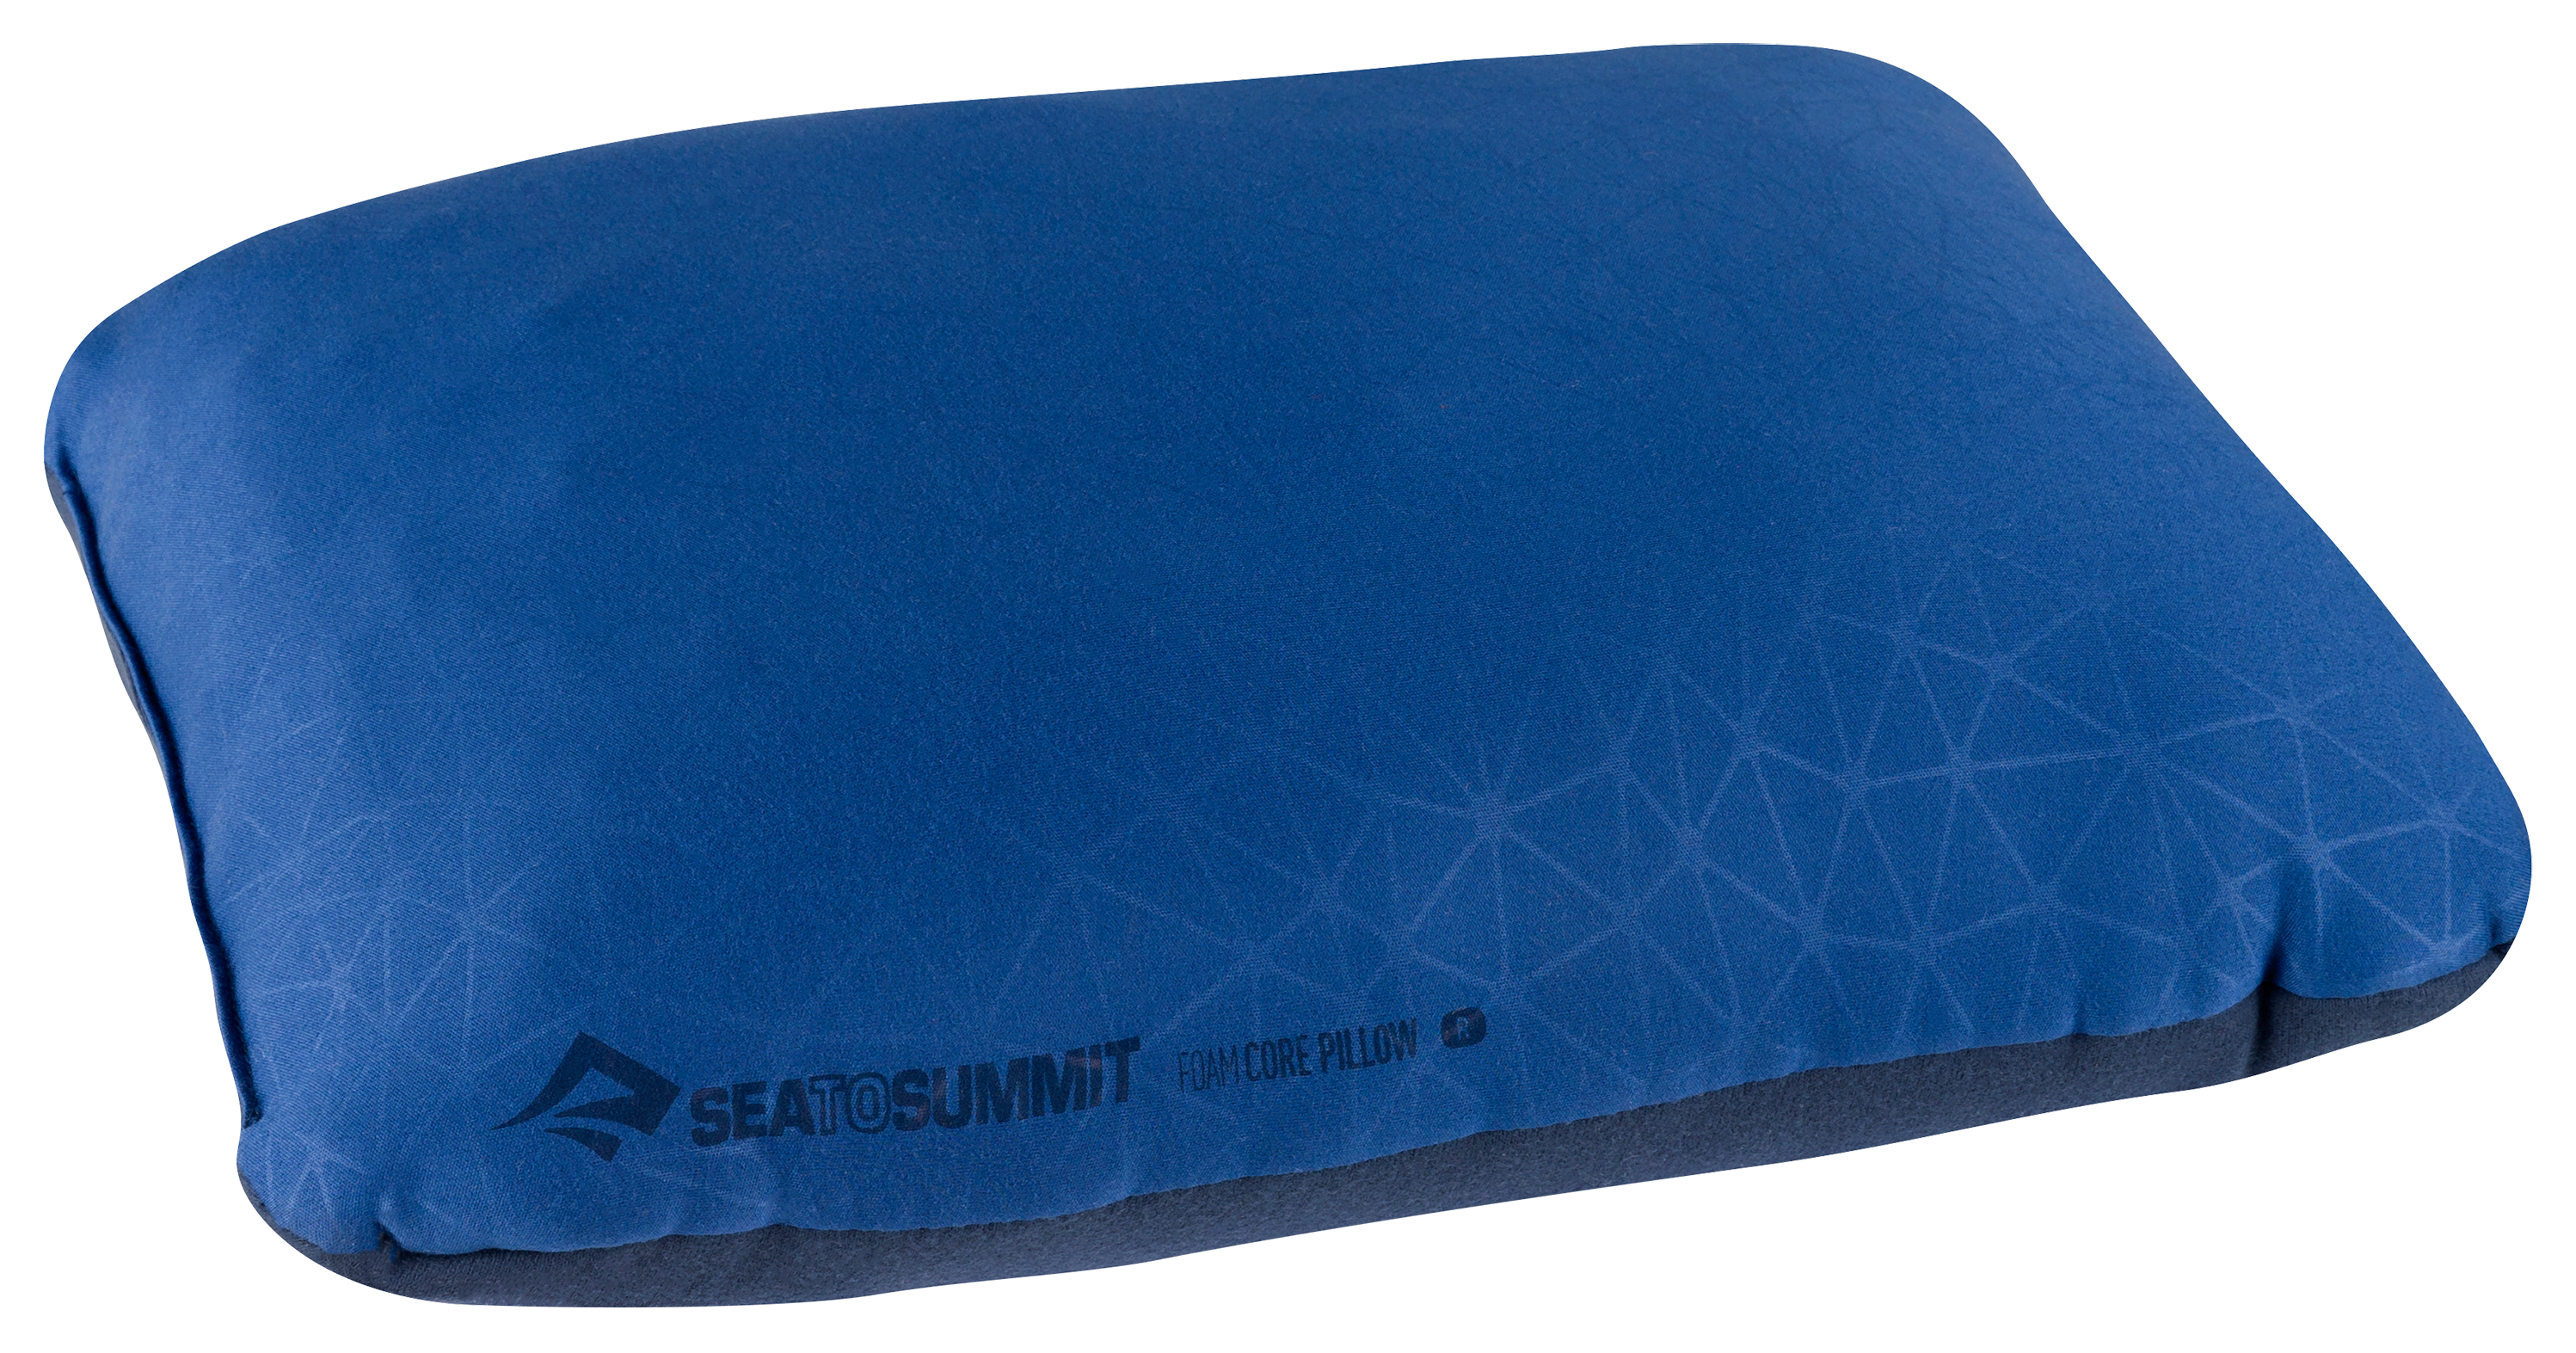 Sea to Summit FoamCore Camping Pillow - Navy Blue - Regular